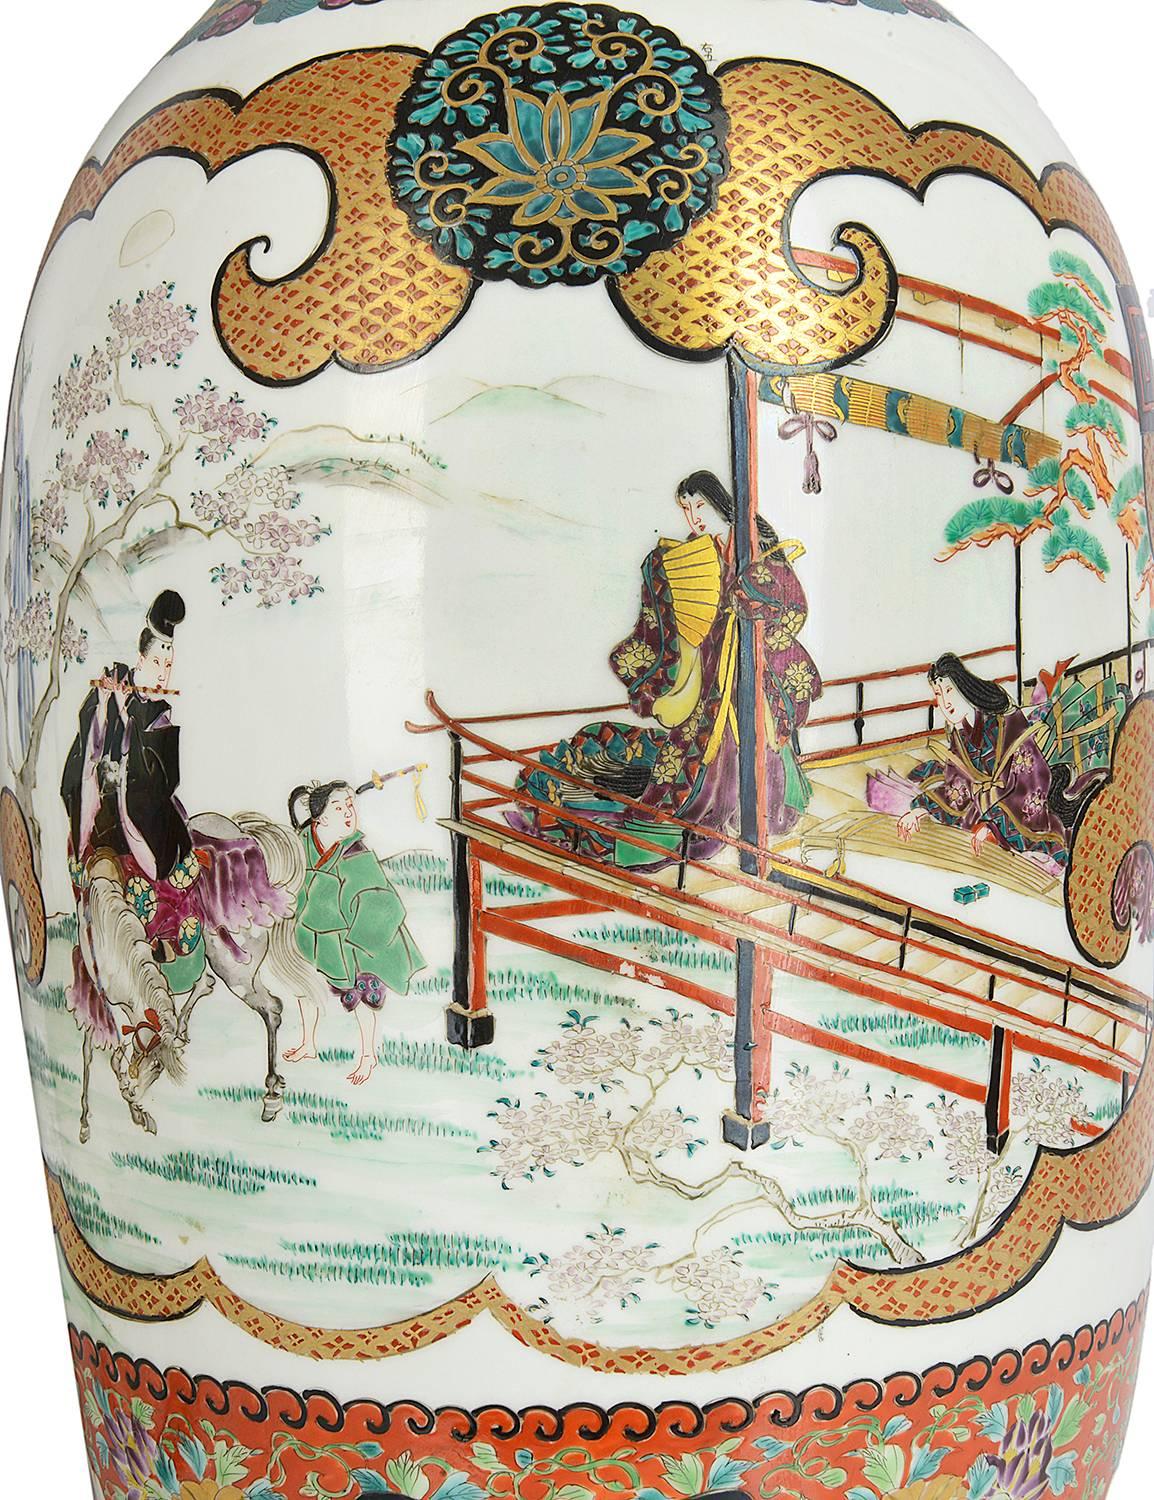 A very impressive and decorative pair of 19th century (Meiji period 1868-1912) Japanese Satsuma flared neck vases. Each with wonderful gilded and hand-painted decoration. Depicting out door scenes of people on horse back, with boats and mountains in